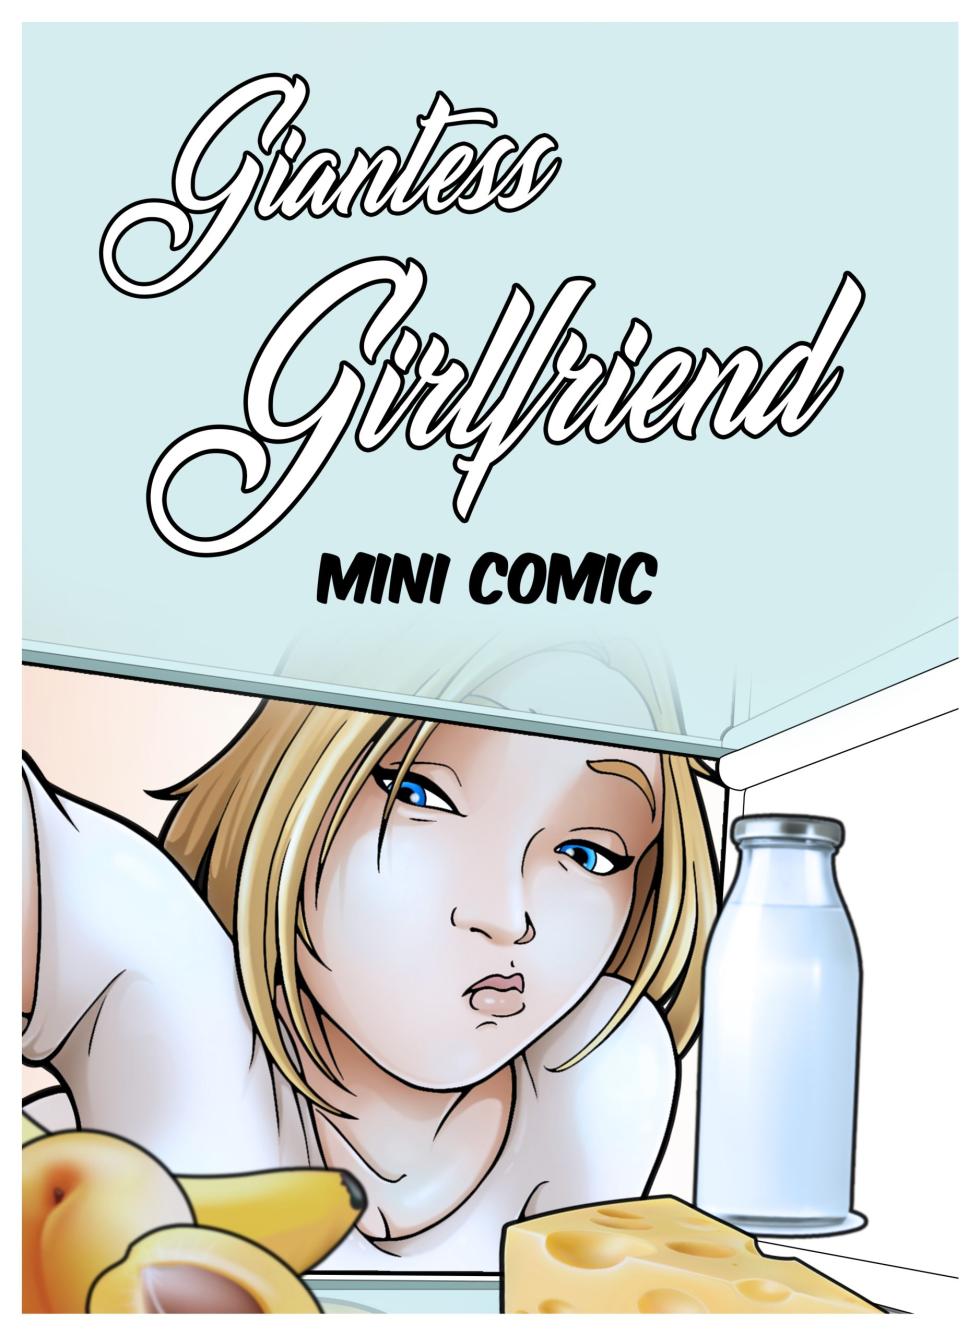 [Mousticus] Giantess Girlfriend - Page 1